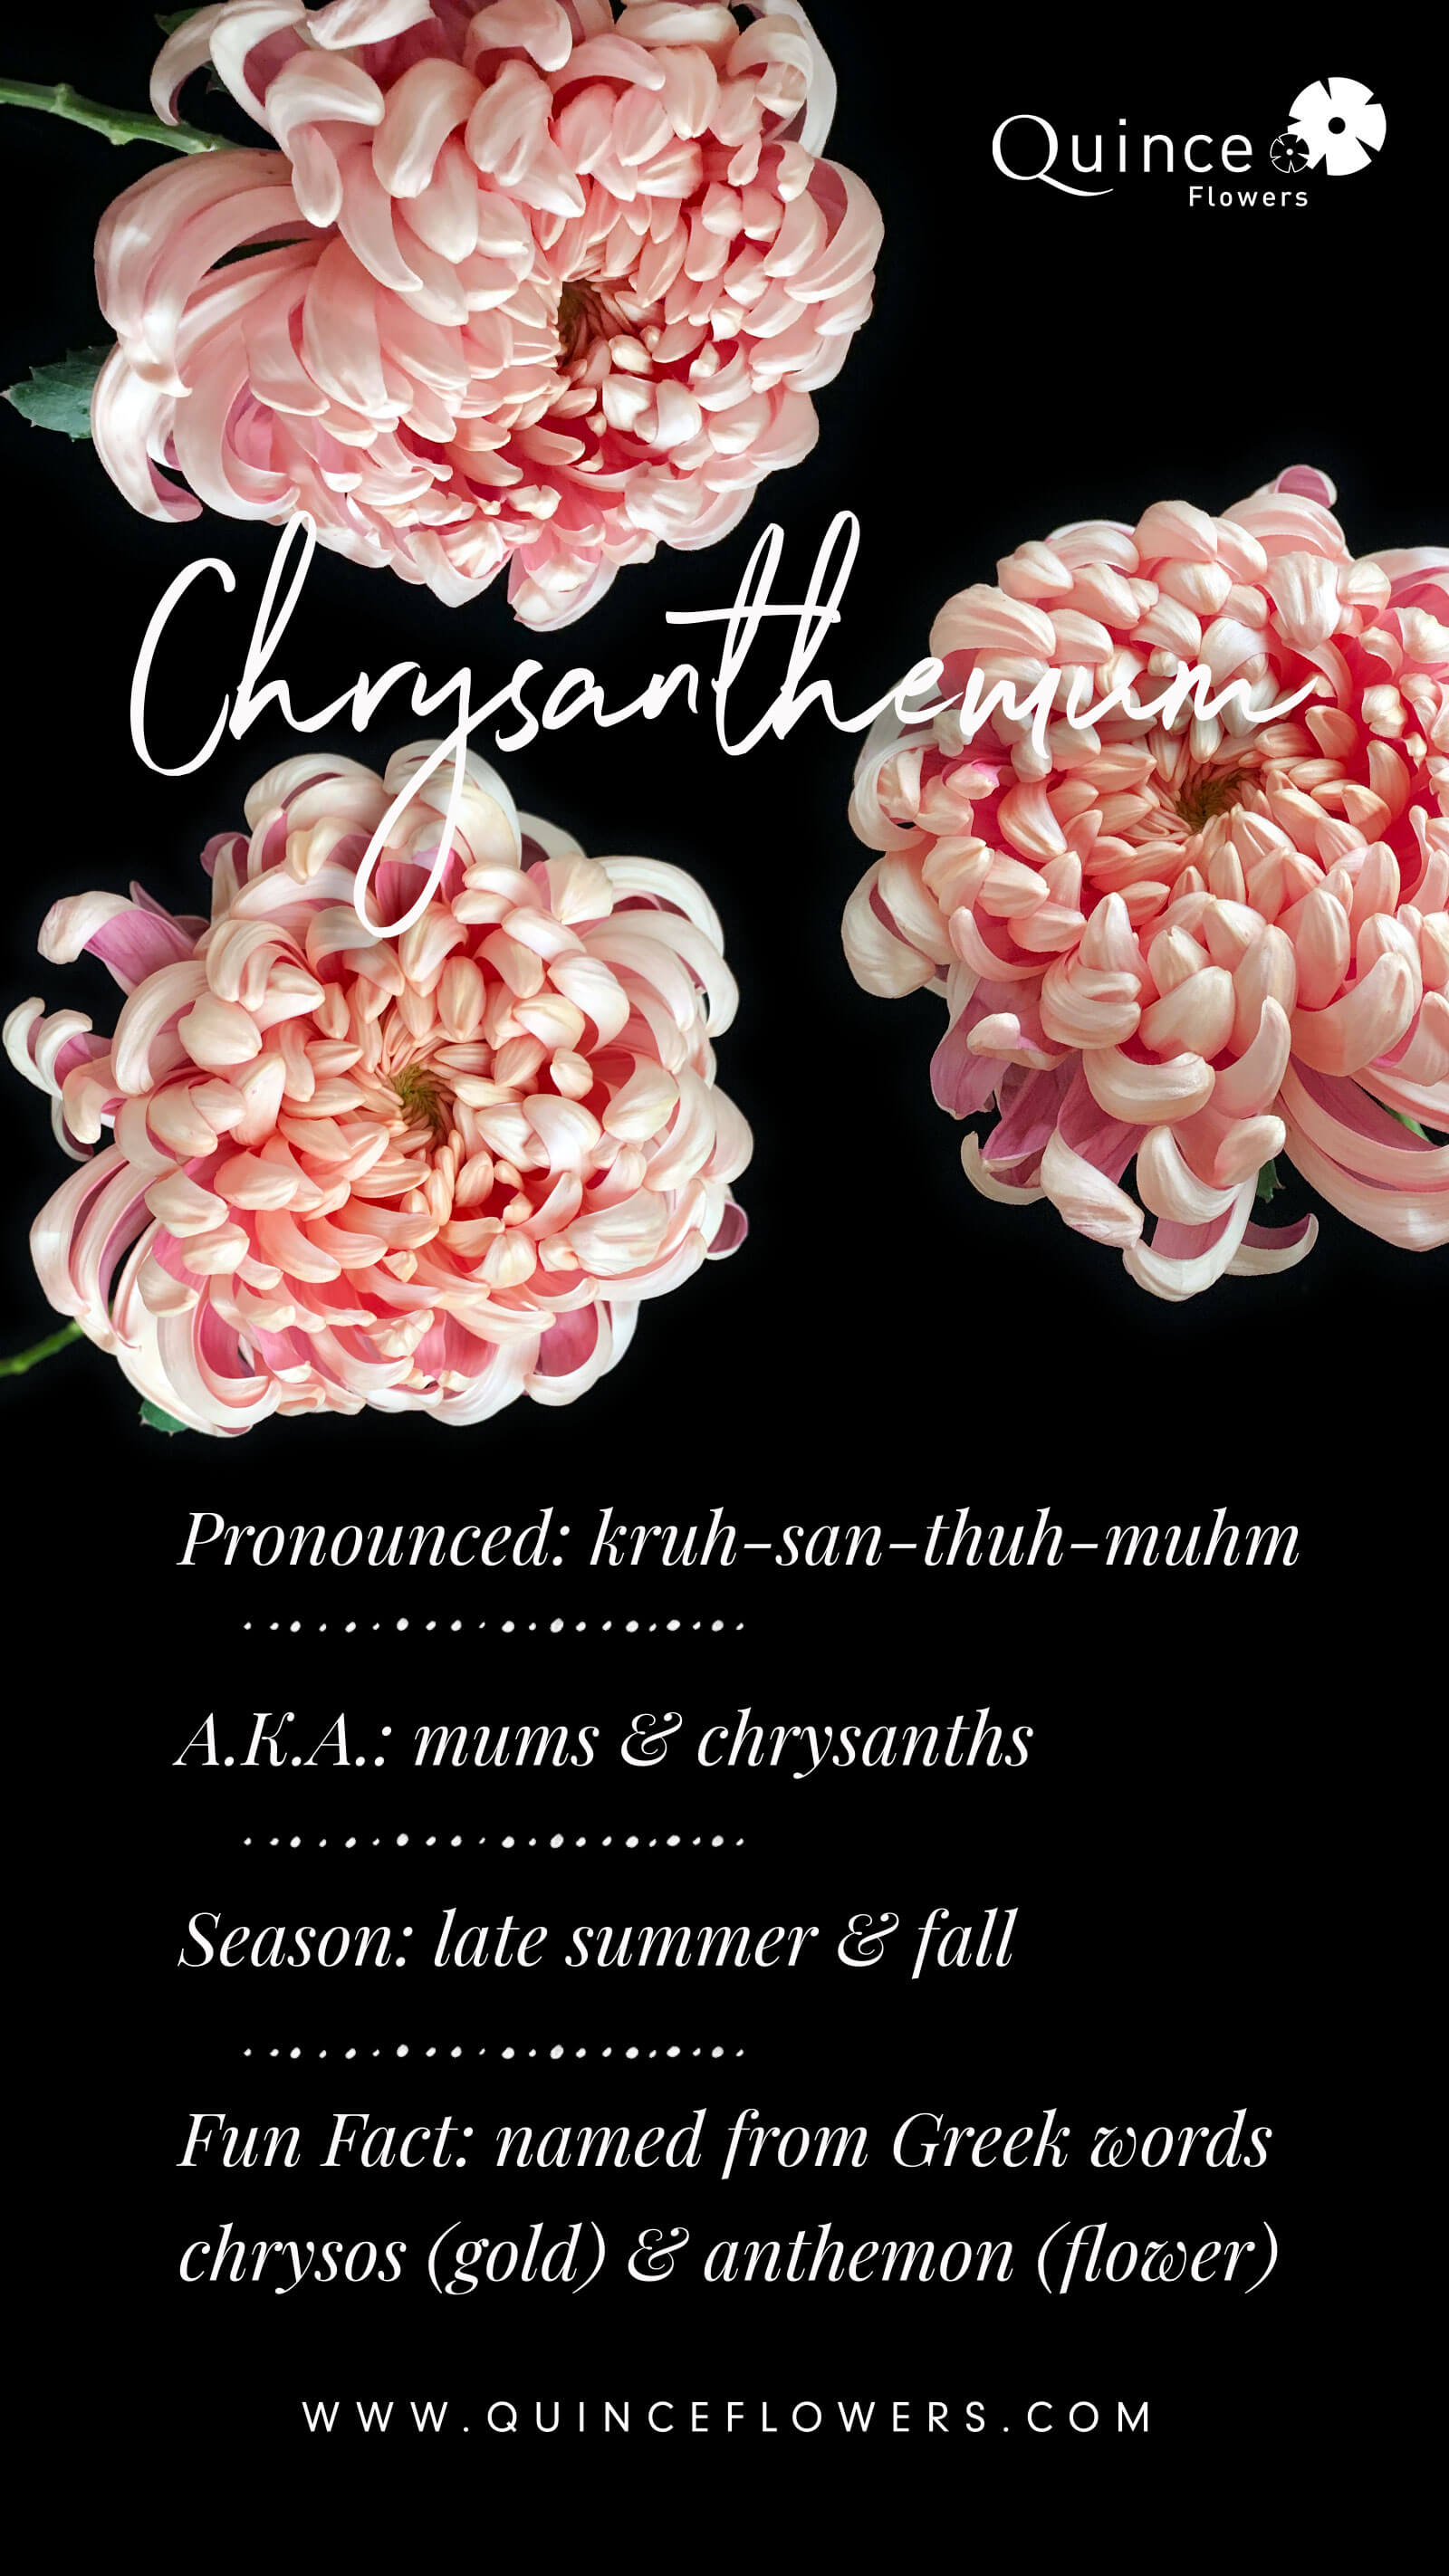 A dark background with three vibrant pink and white chrysanthemum flowers and the word ‘Chrysanthemum’ written in elegant white script.Order online for plants & flowers from the best florist in Toronto near you.